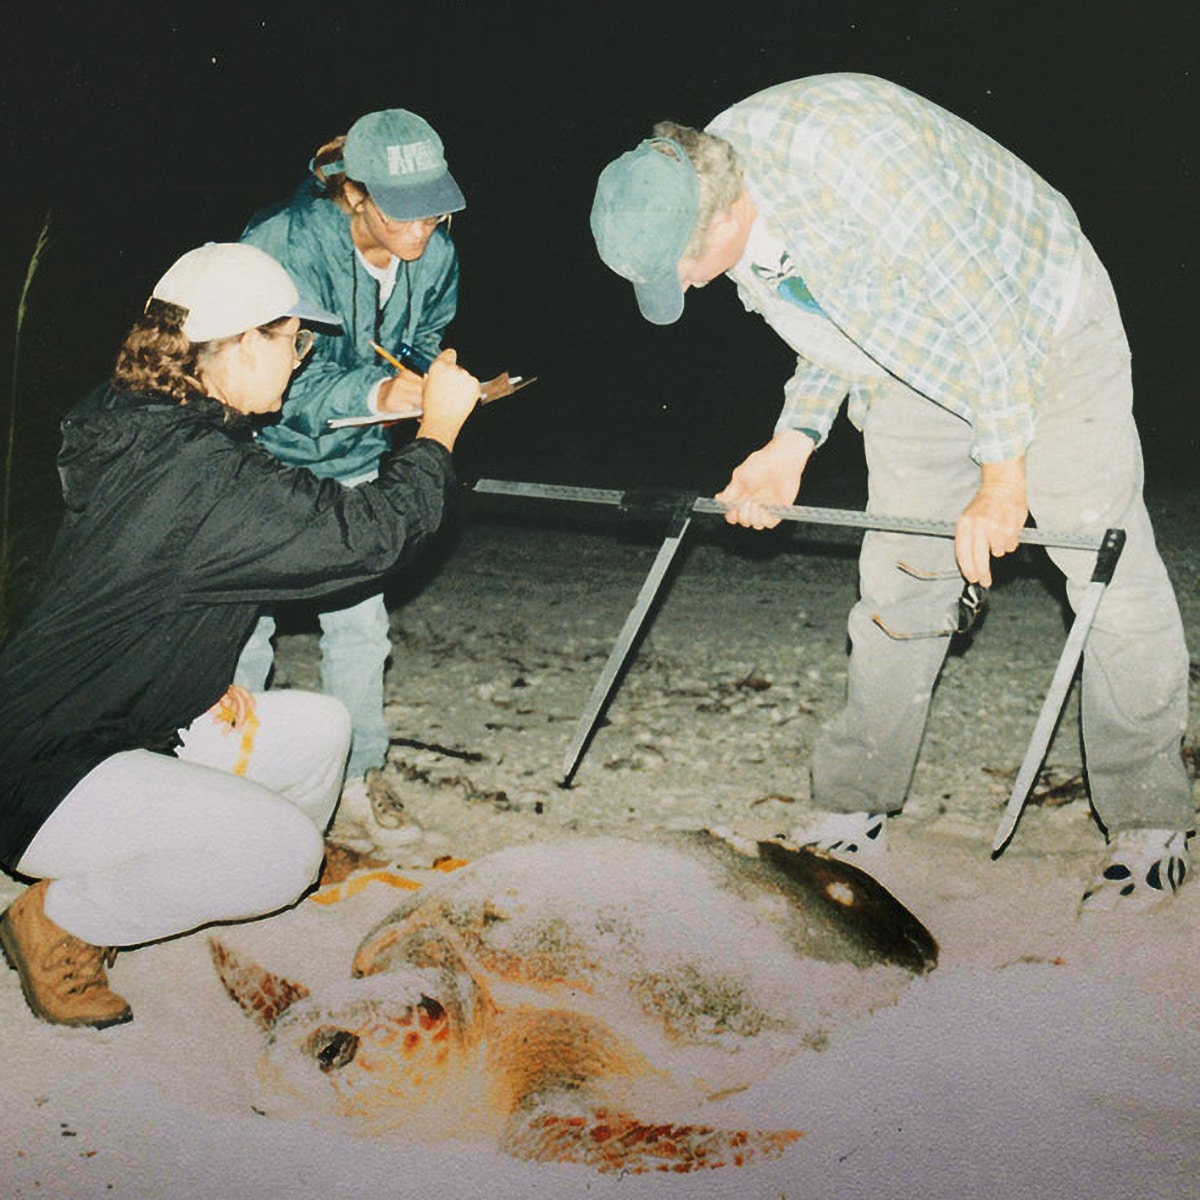 Old photo of science team measuring a loggerhead sea turtle with large calipers